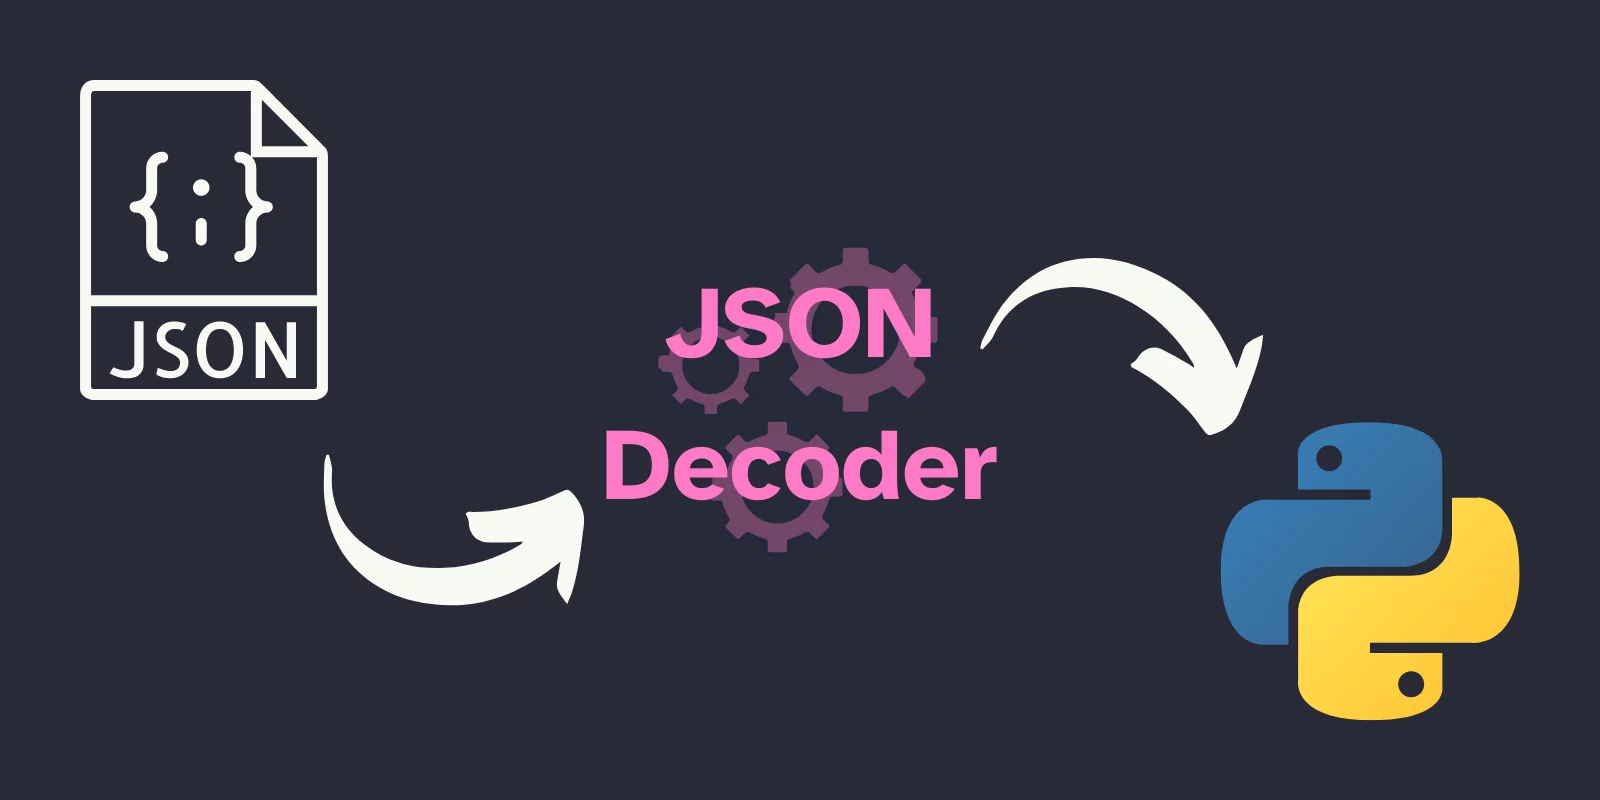 A solid background with an arrow pointing to some faded gears behind the words “JSON Decoder”, which then have an arrow pointing to the Python logo.